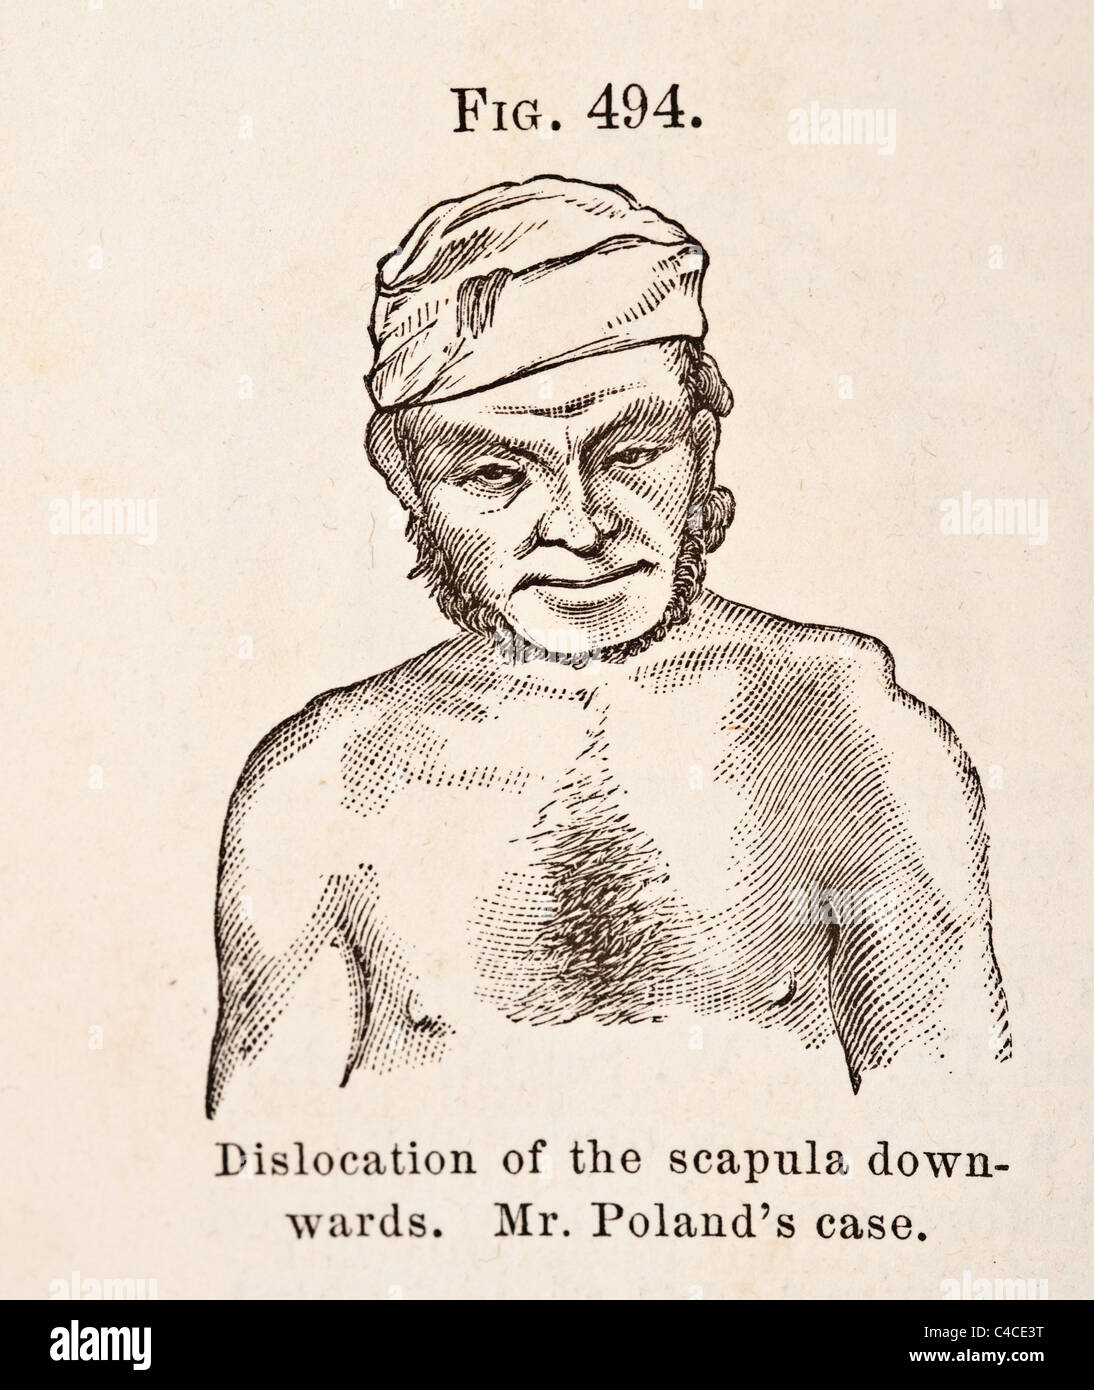 Antique Medical Illustration Depicting Dislocation of Scapula and Clavicle Stock Photo